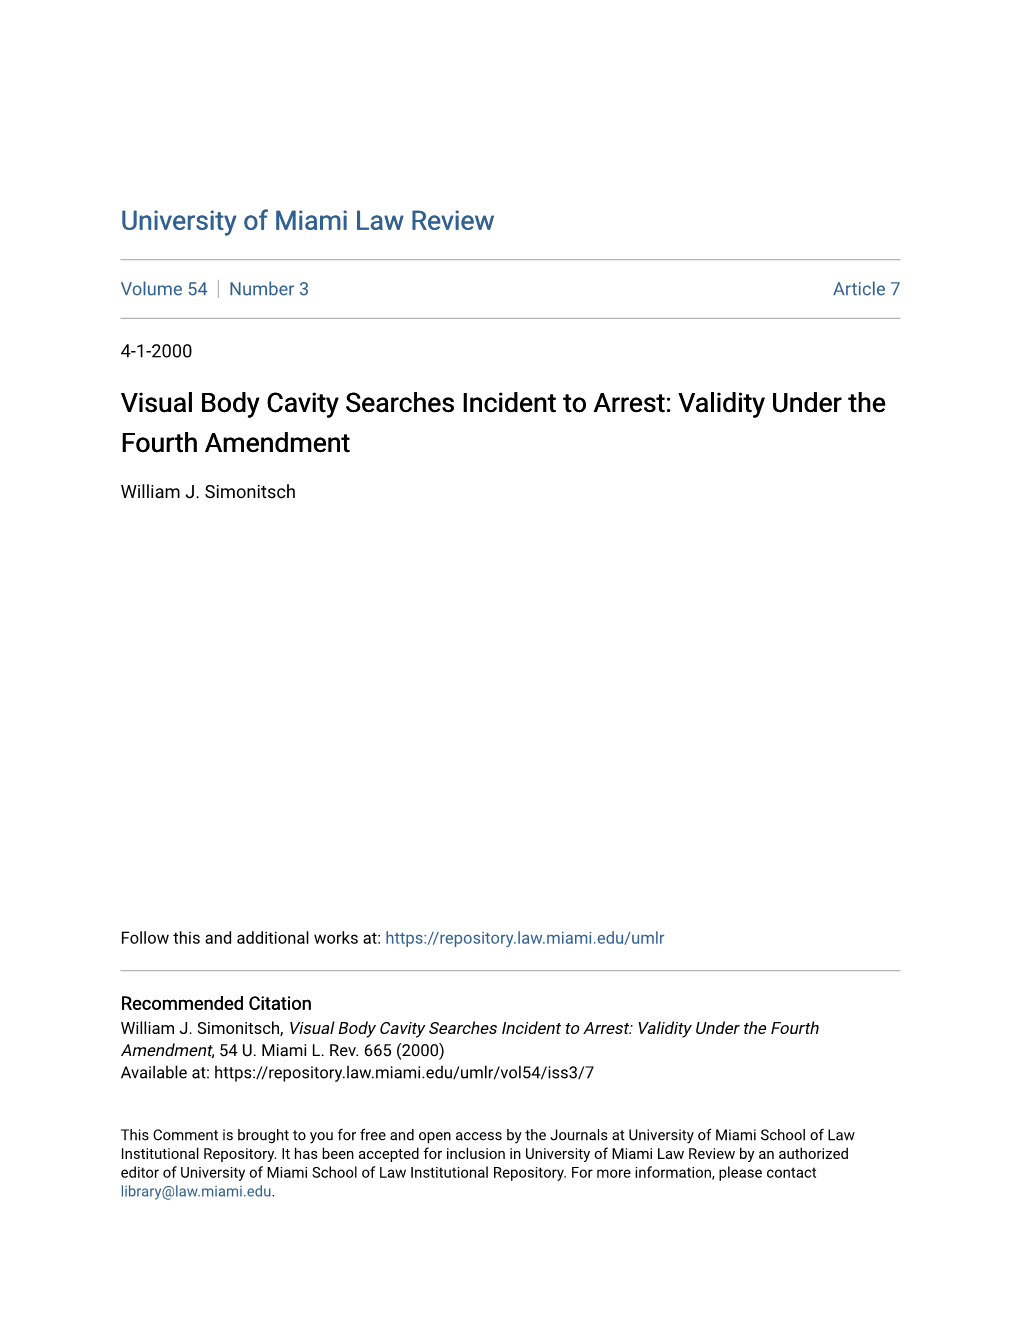 Visual Body Cavity Searches Incident to Arrest: Validity Under the Fourth Amendment